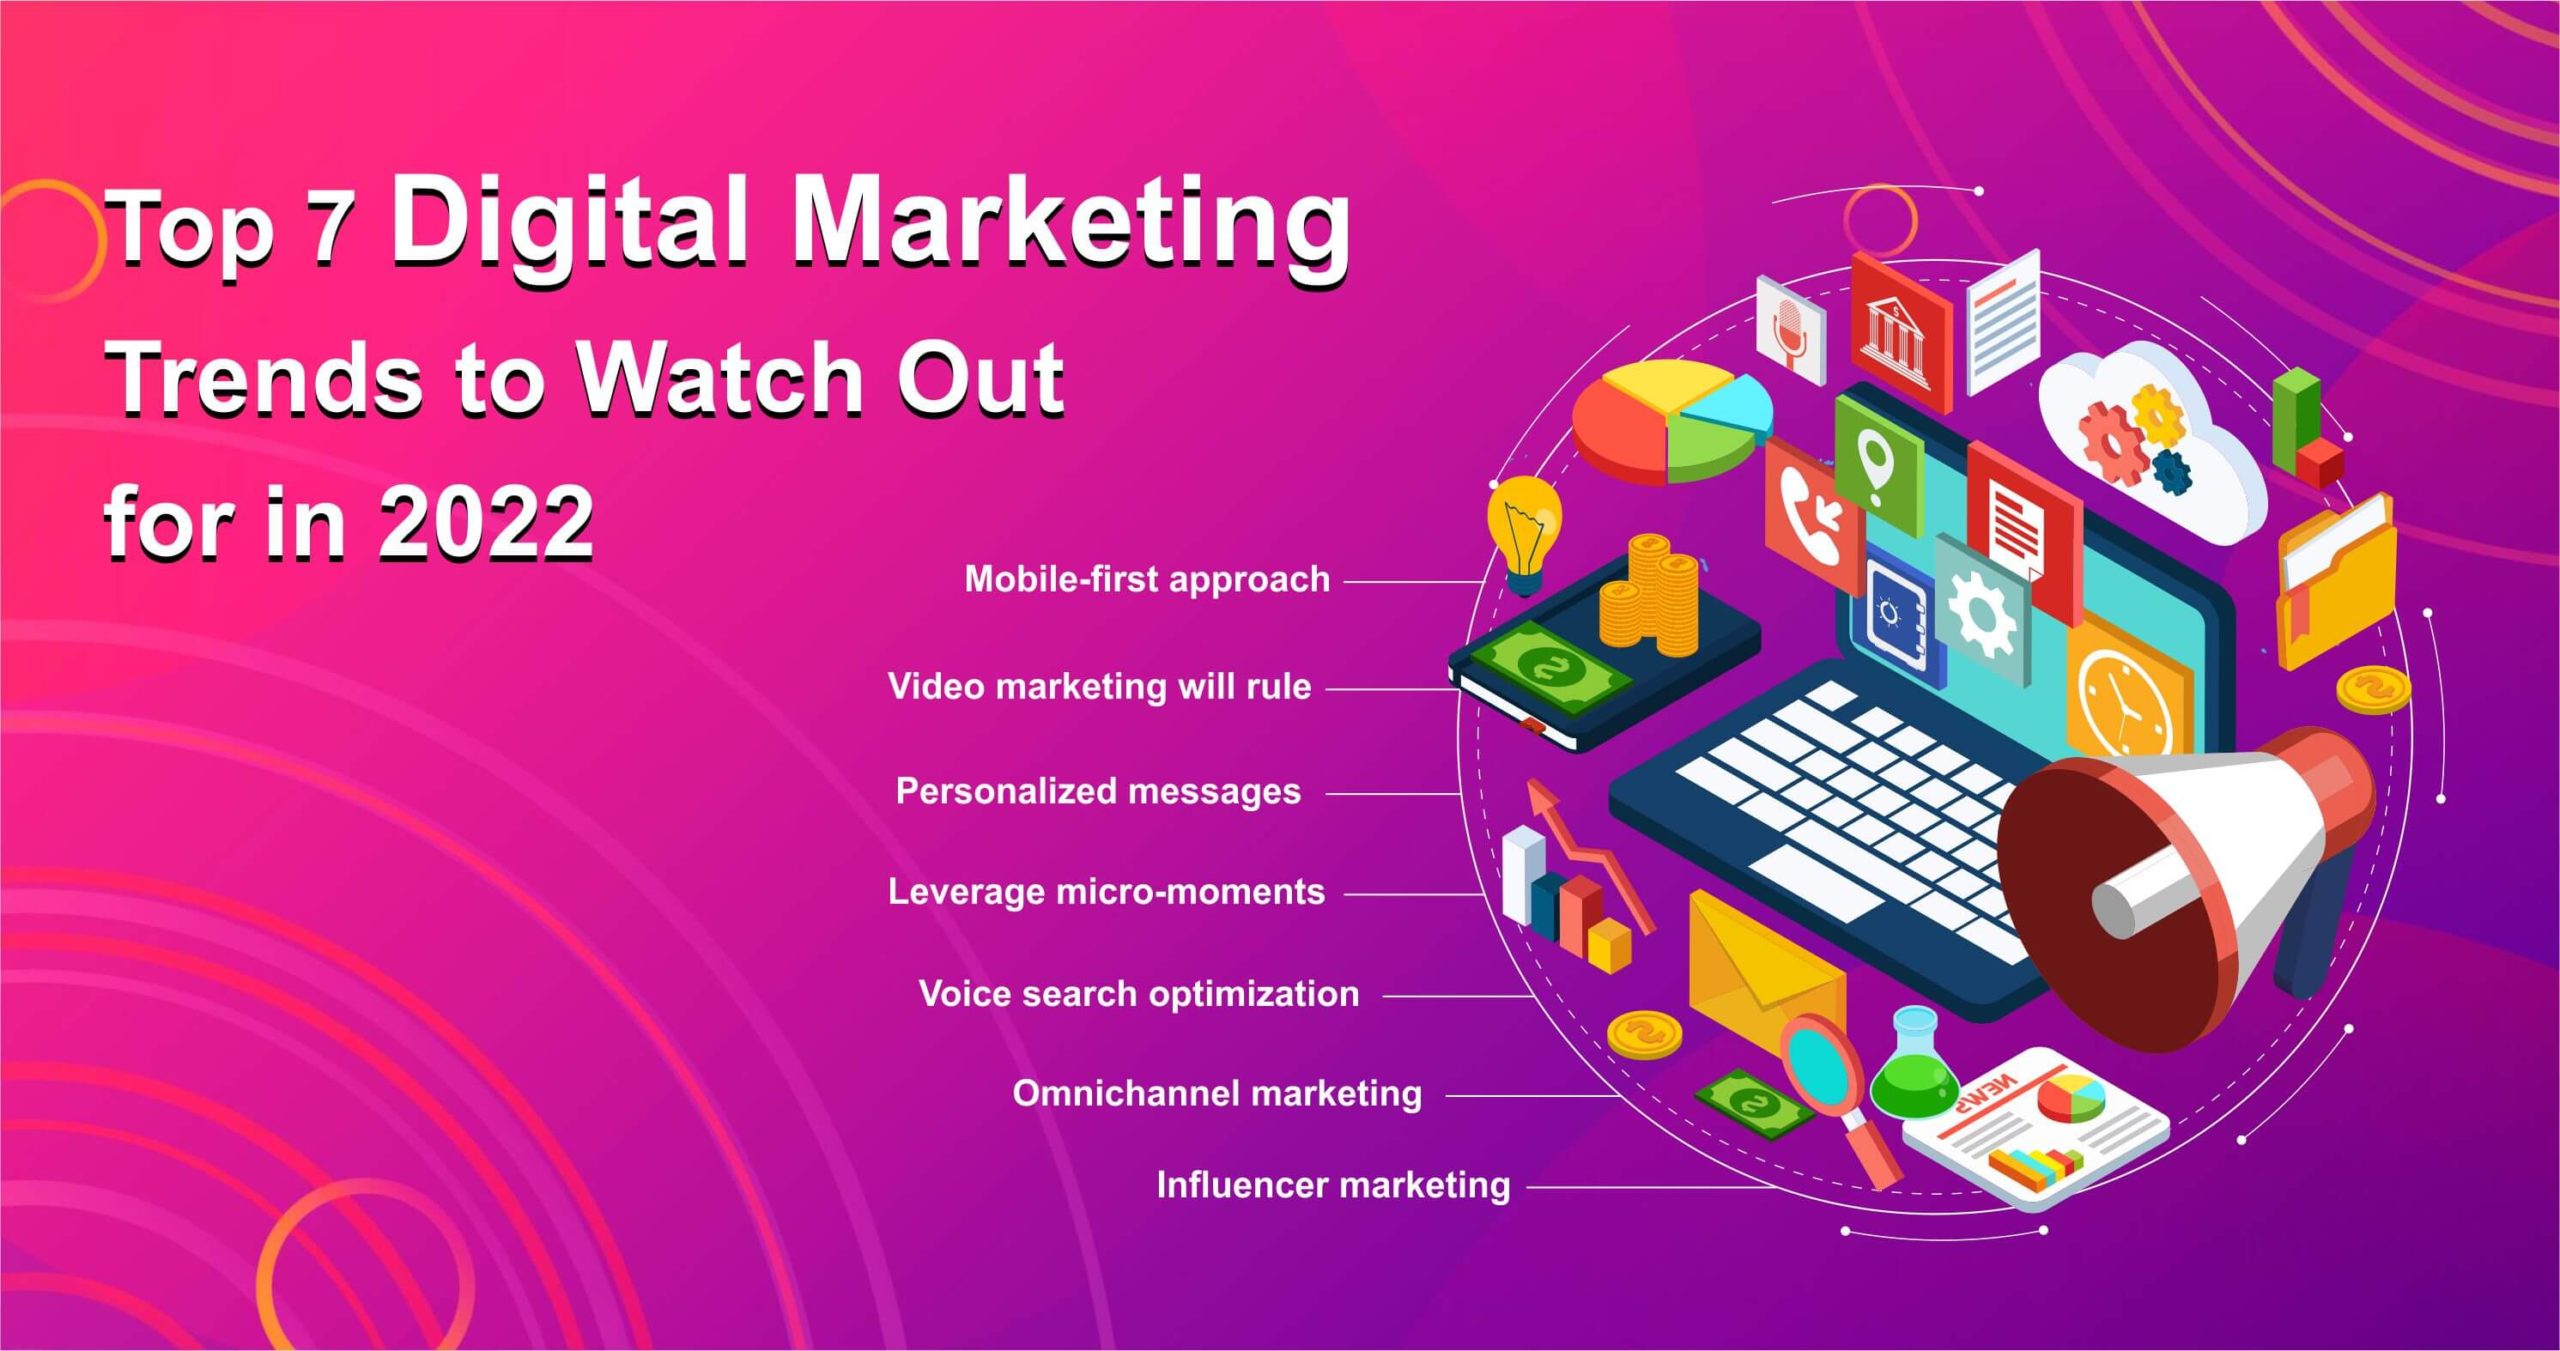 Top 7 Digital Marketing Trends to Watch Out for in 2022